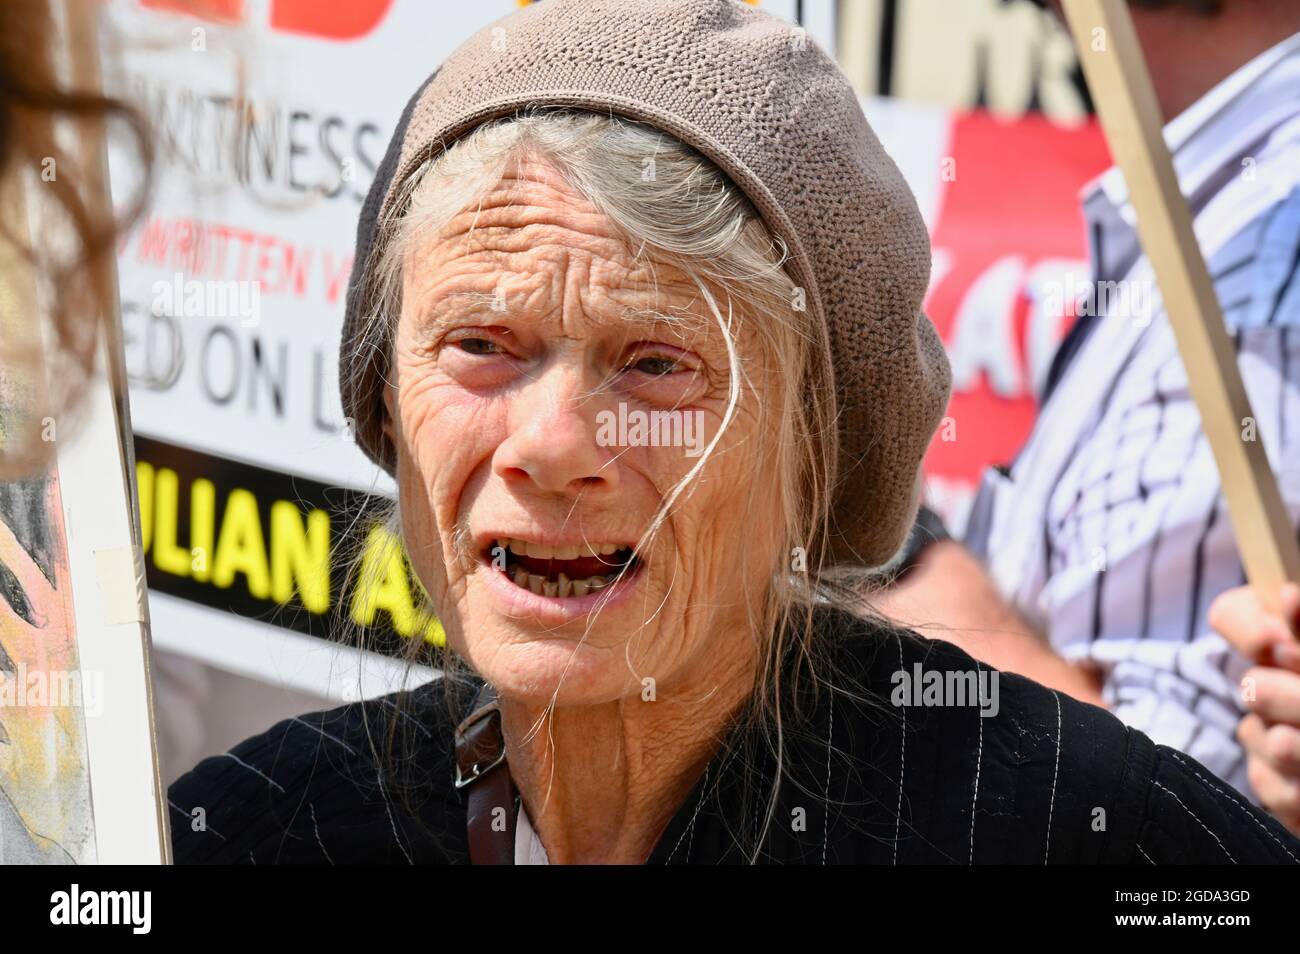 Senior Protester, Julian Assange US Extradition Appeal, High Courts of Justice, The Strand, Londra. REGNO UNITO Foto Stock